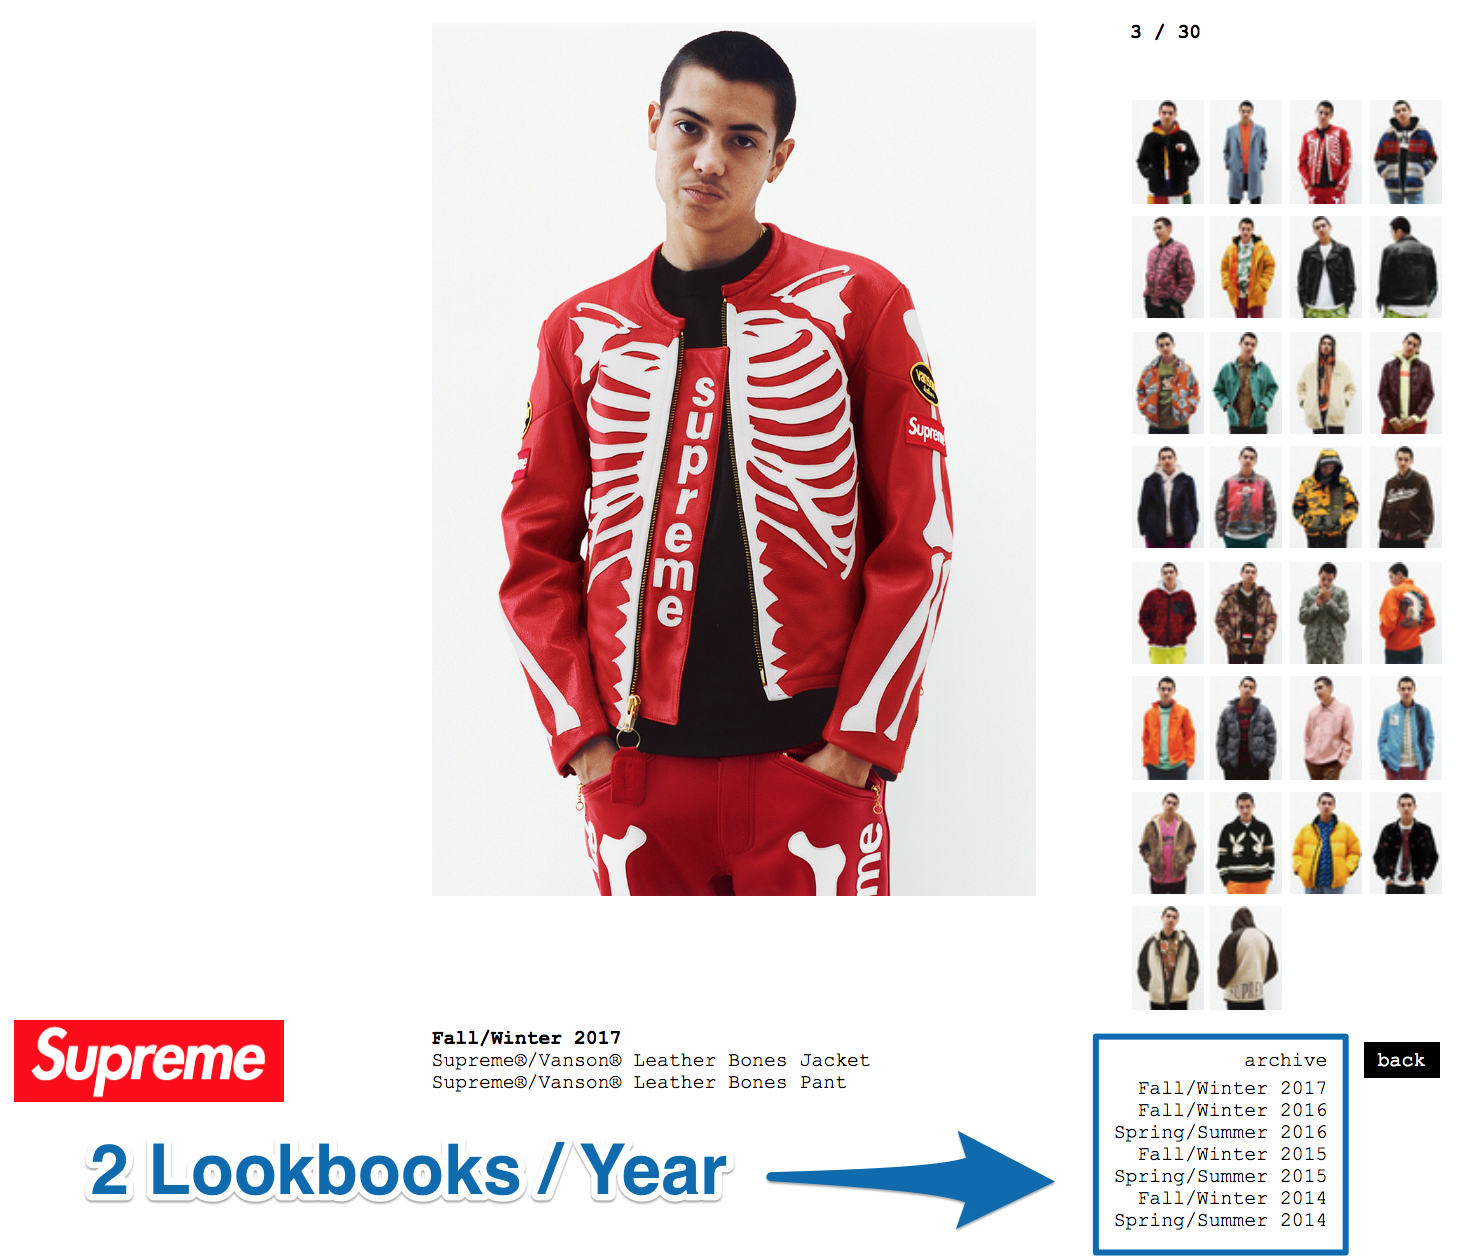 Screenshot showing the lookbooks for a certain piece of clothing by Supreme